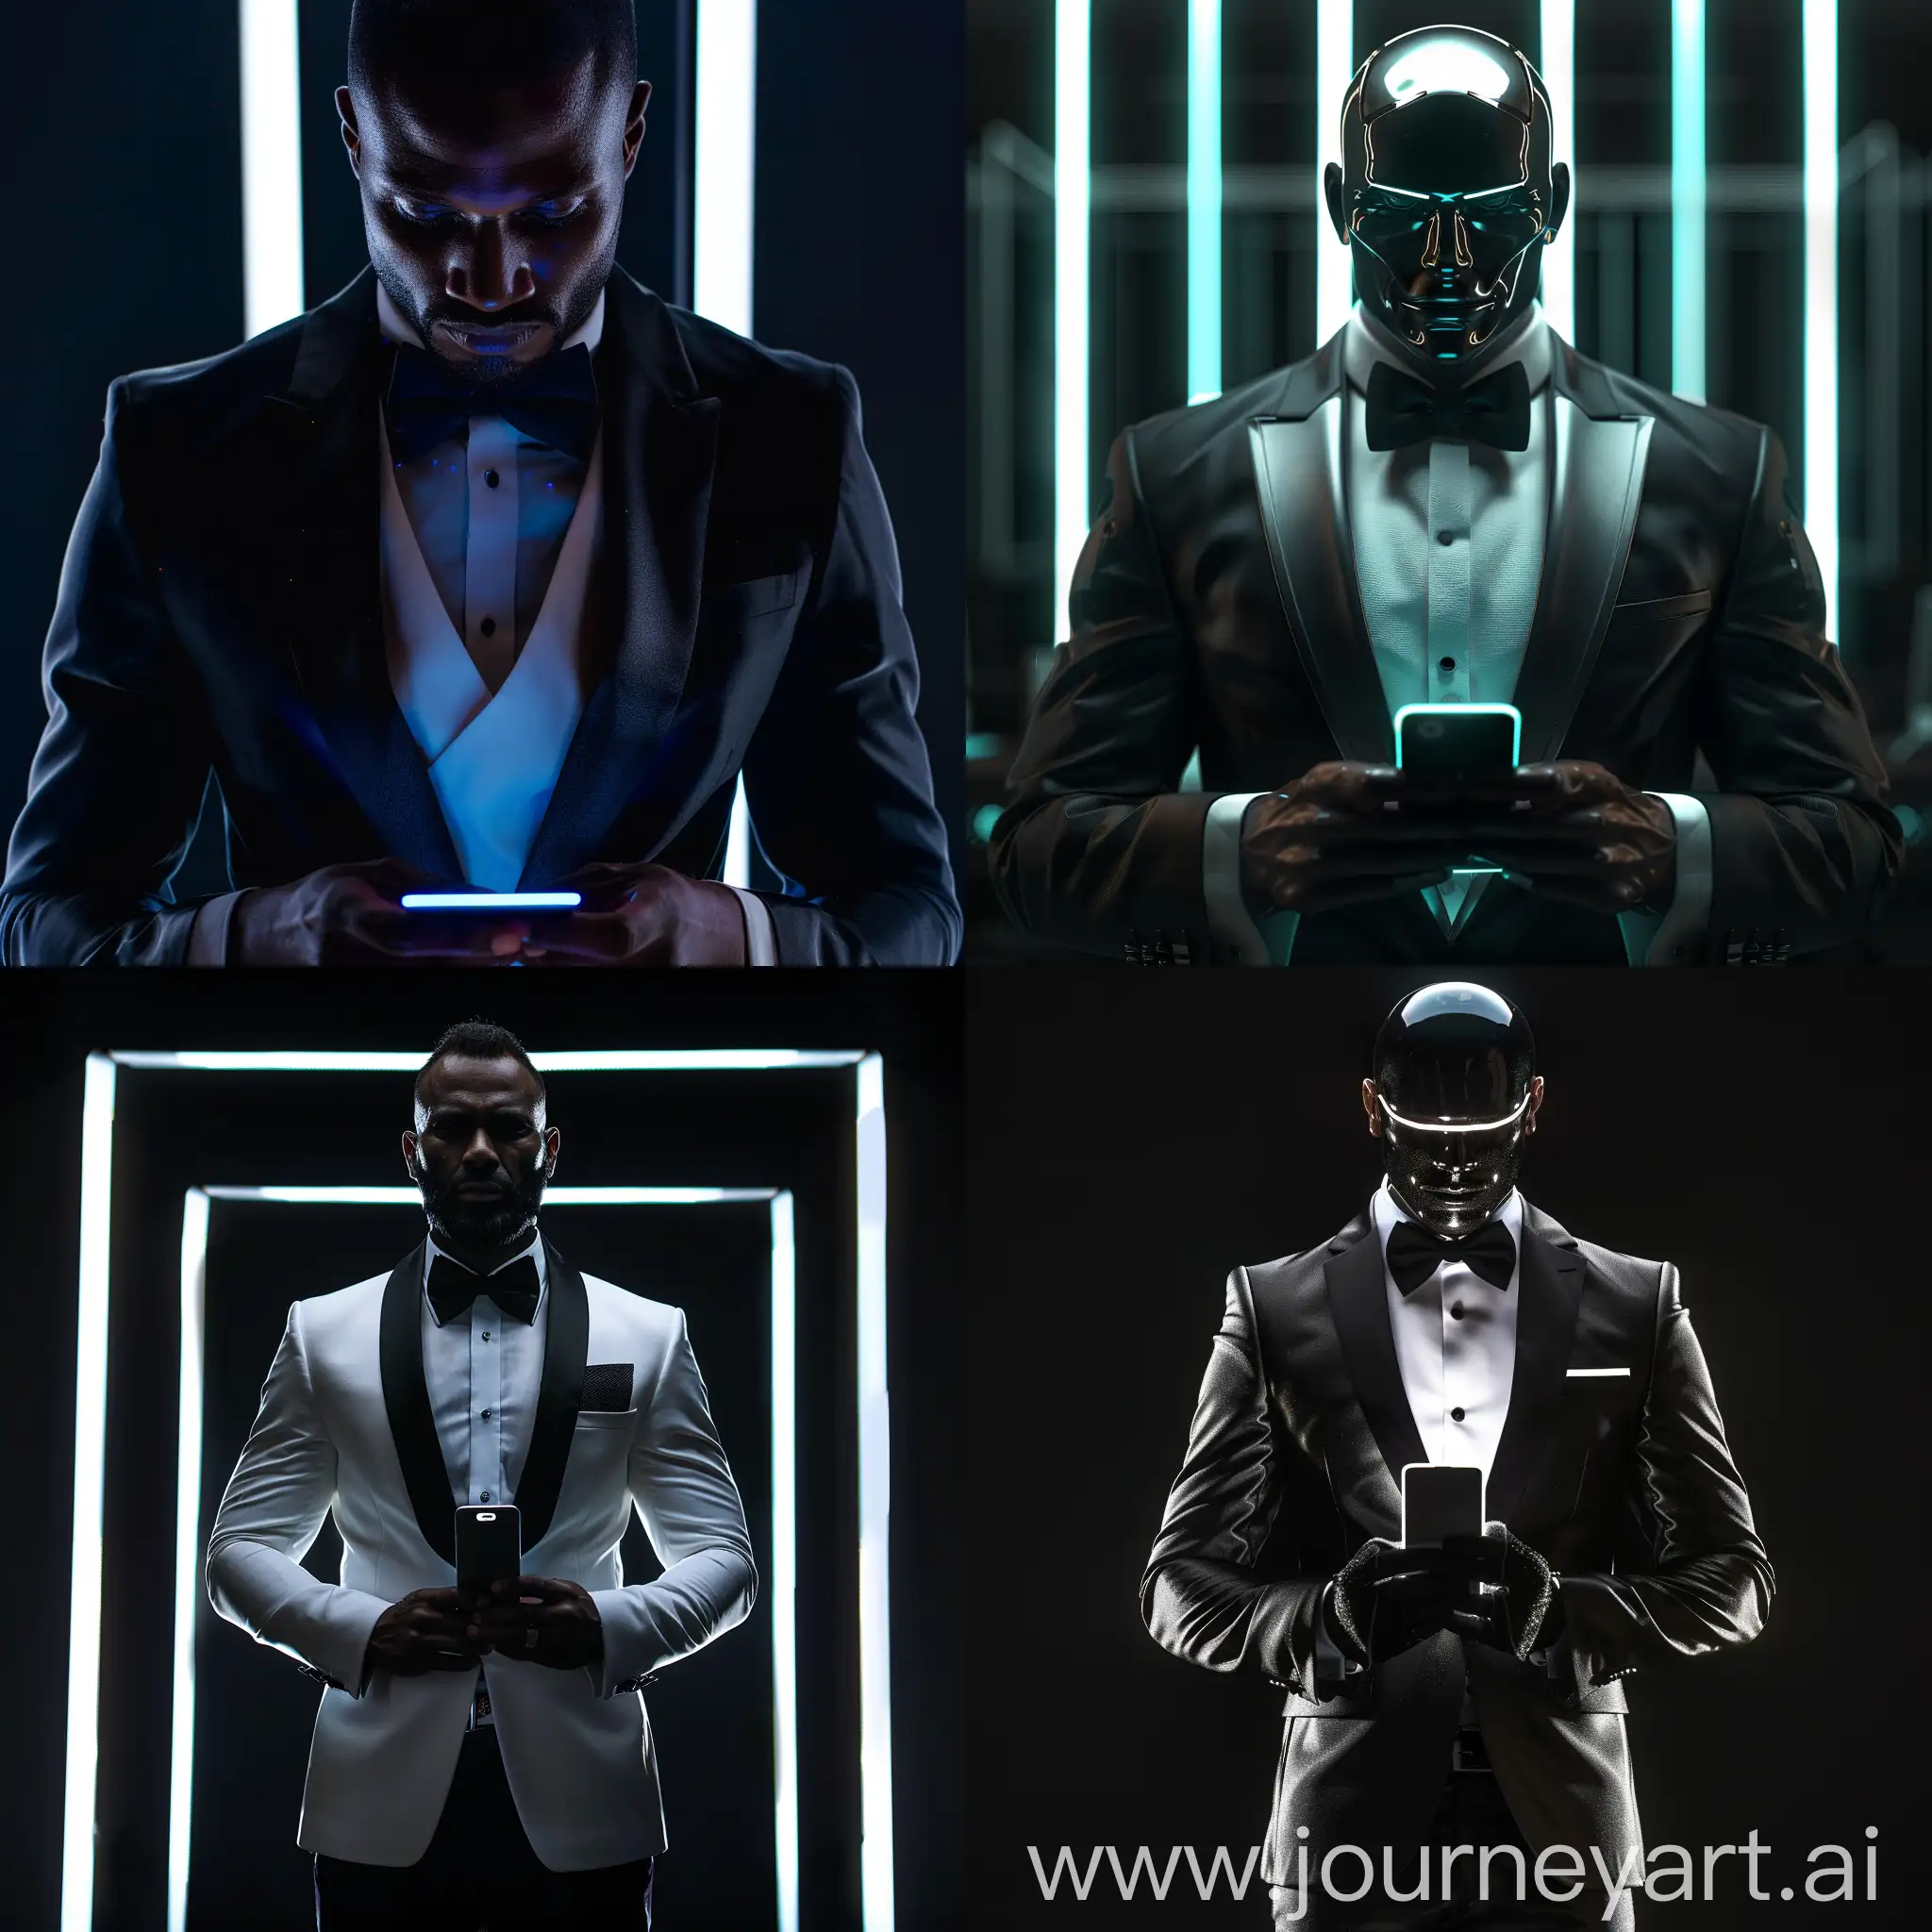 Powerful-Executive-in-Modern-Futuristic-Tuxedo-with-Black-Lights-in-HighTech-Office